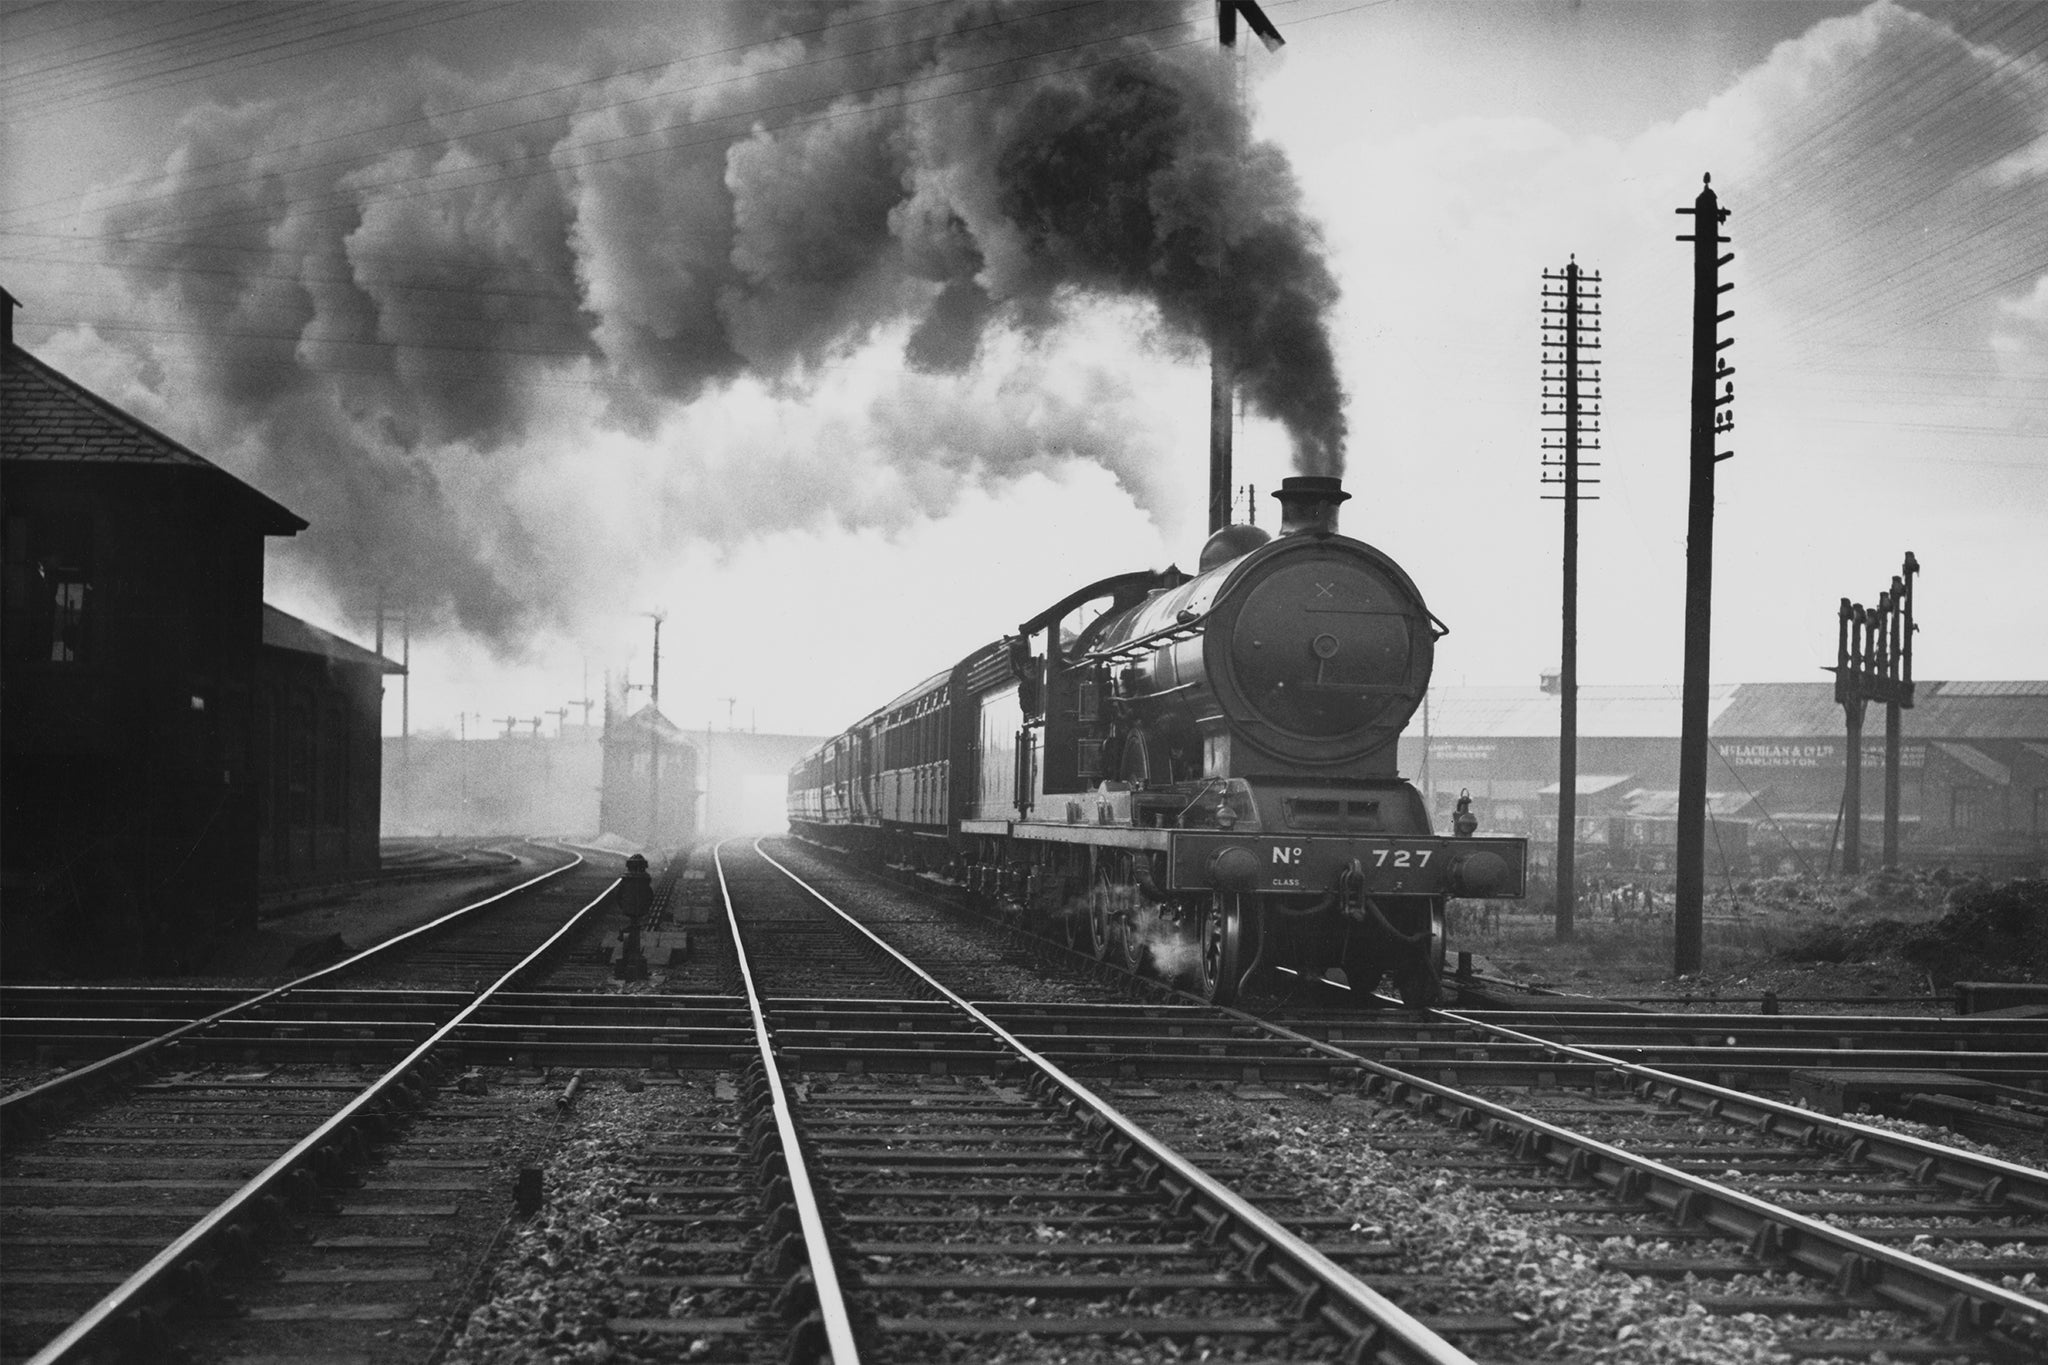 The LNER C7 Class 4-4-2 steam locomotive No 727 approaches the Darlington Bank Top crossing on 1 June 1925